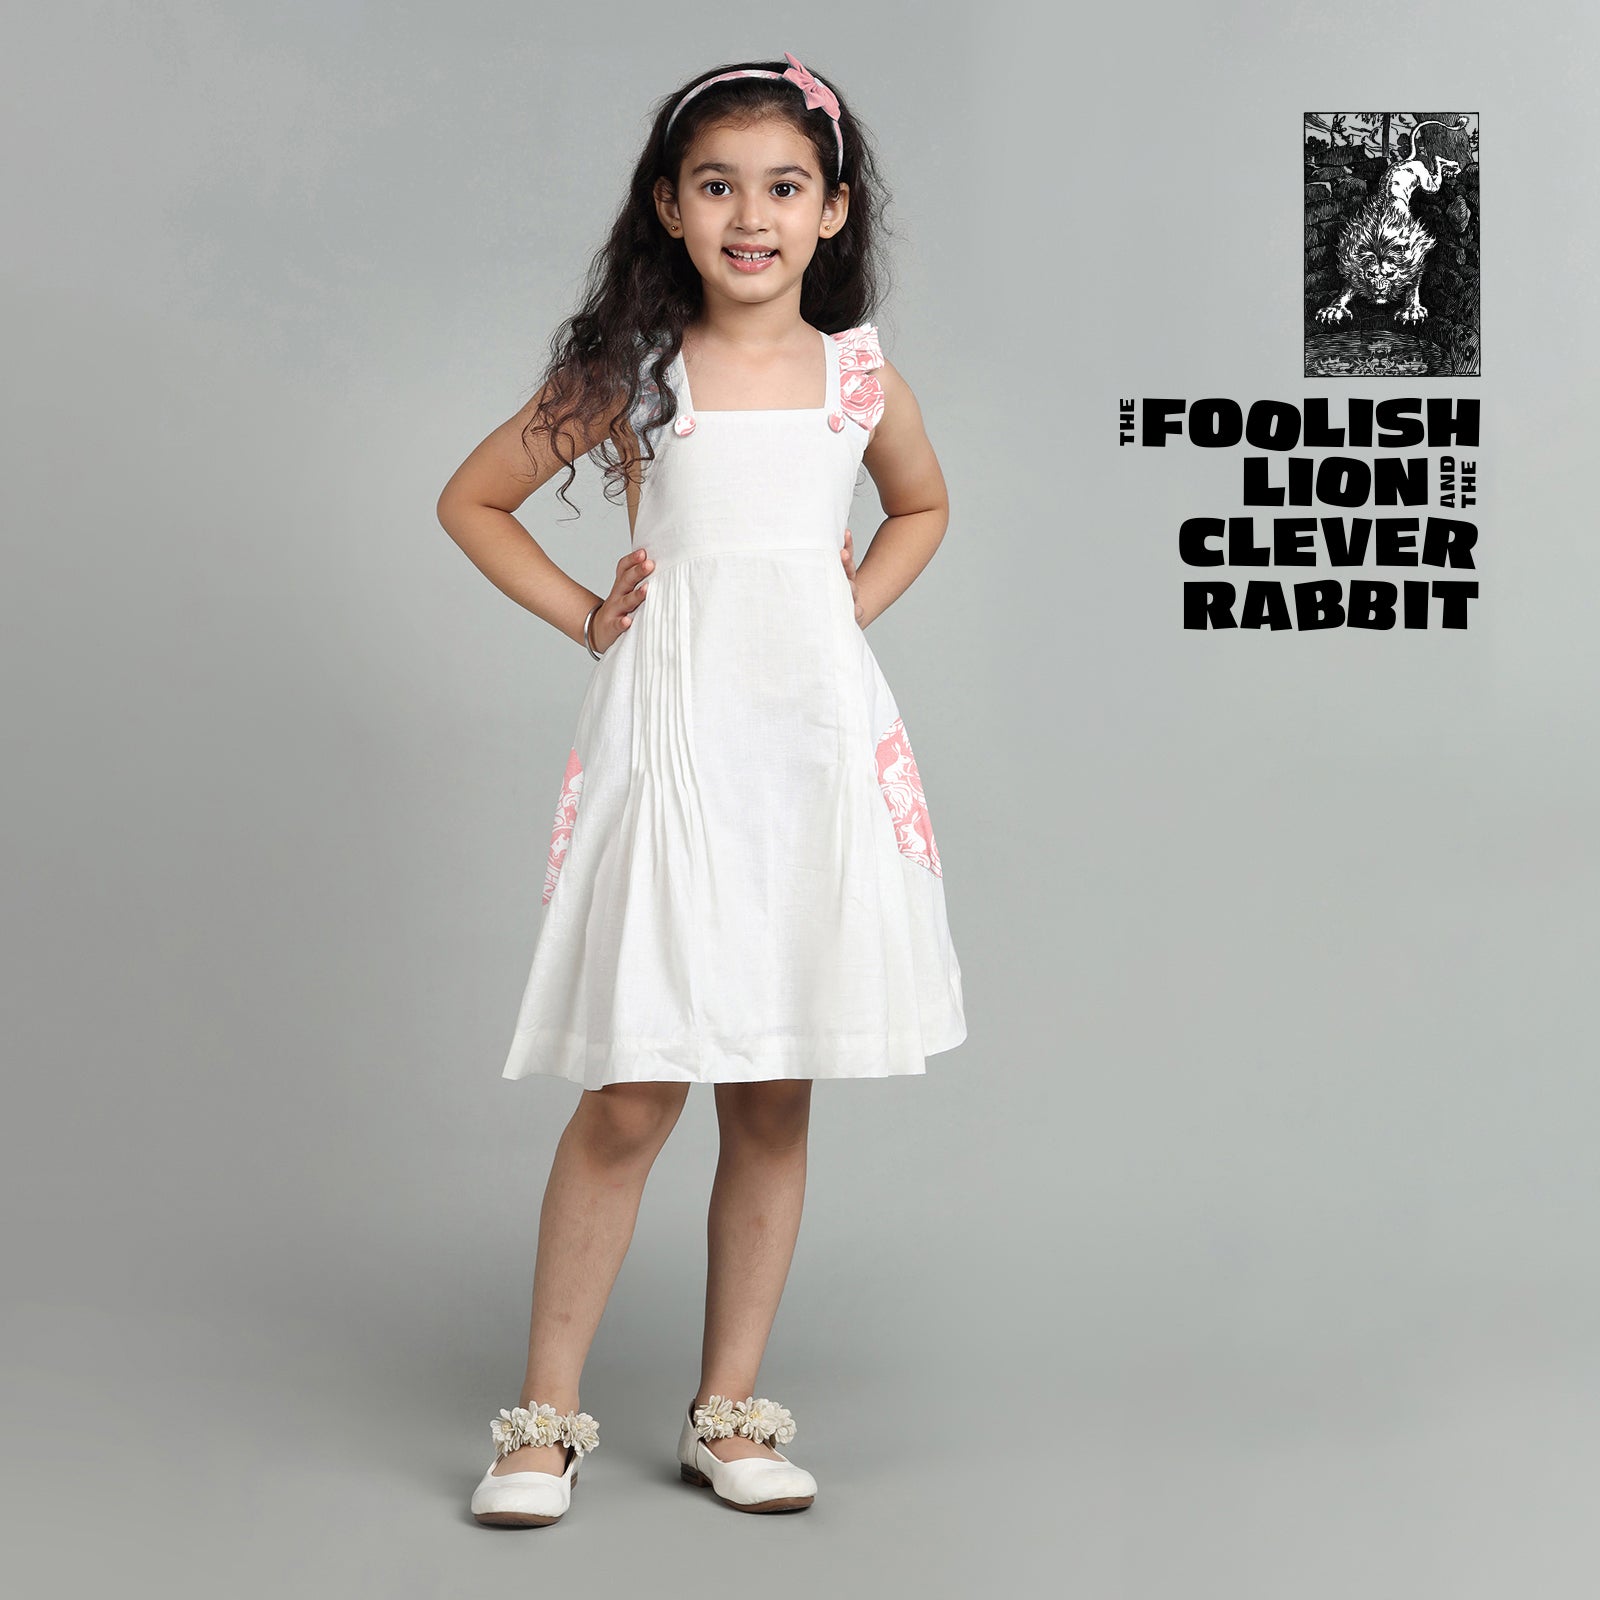 Cotton White Crisscross Back Frock For Girls with The Foolish Lion & The Clever Rabbit Print